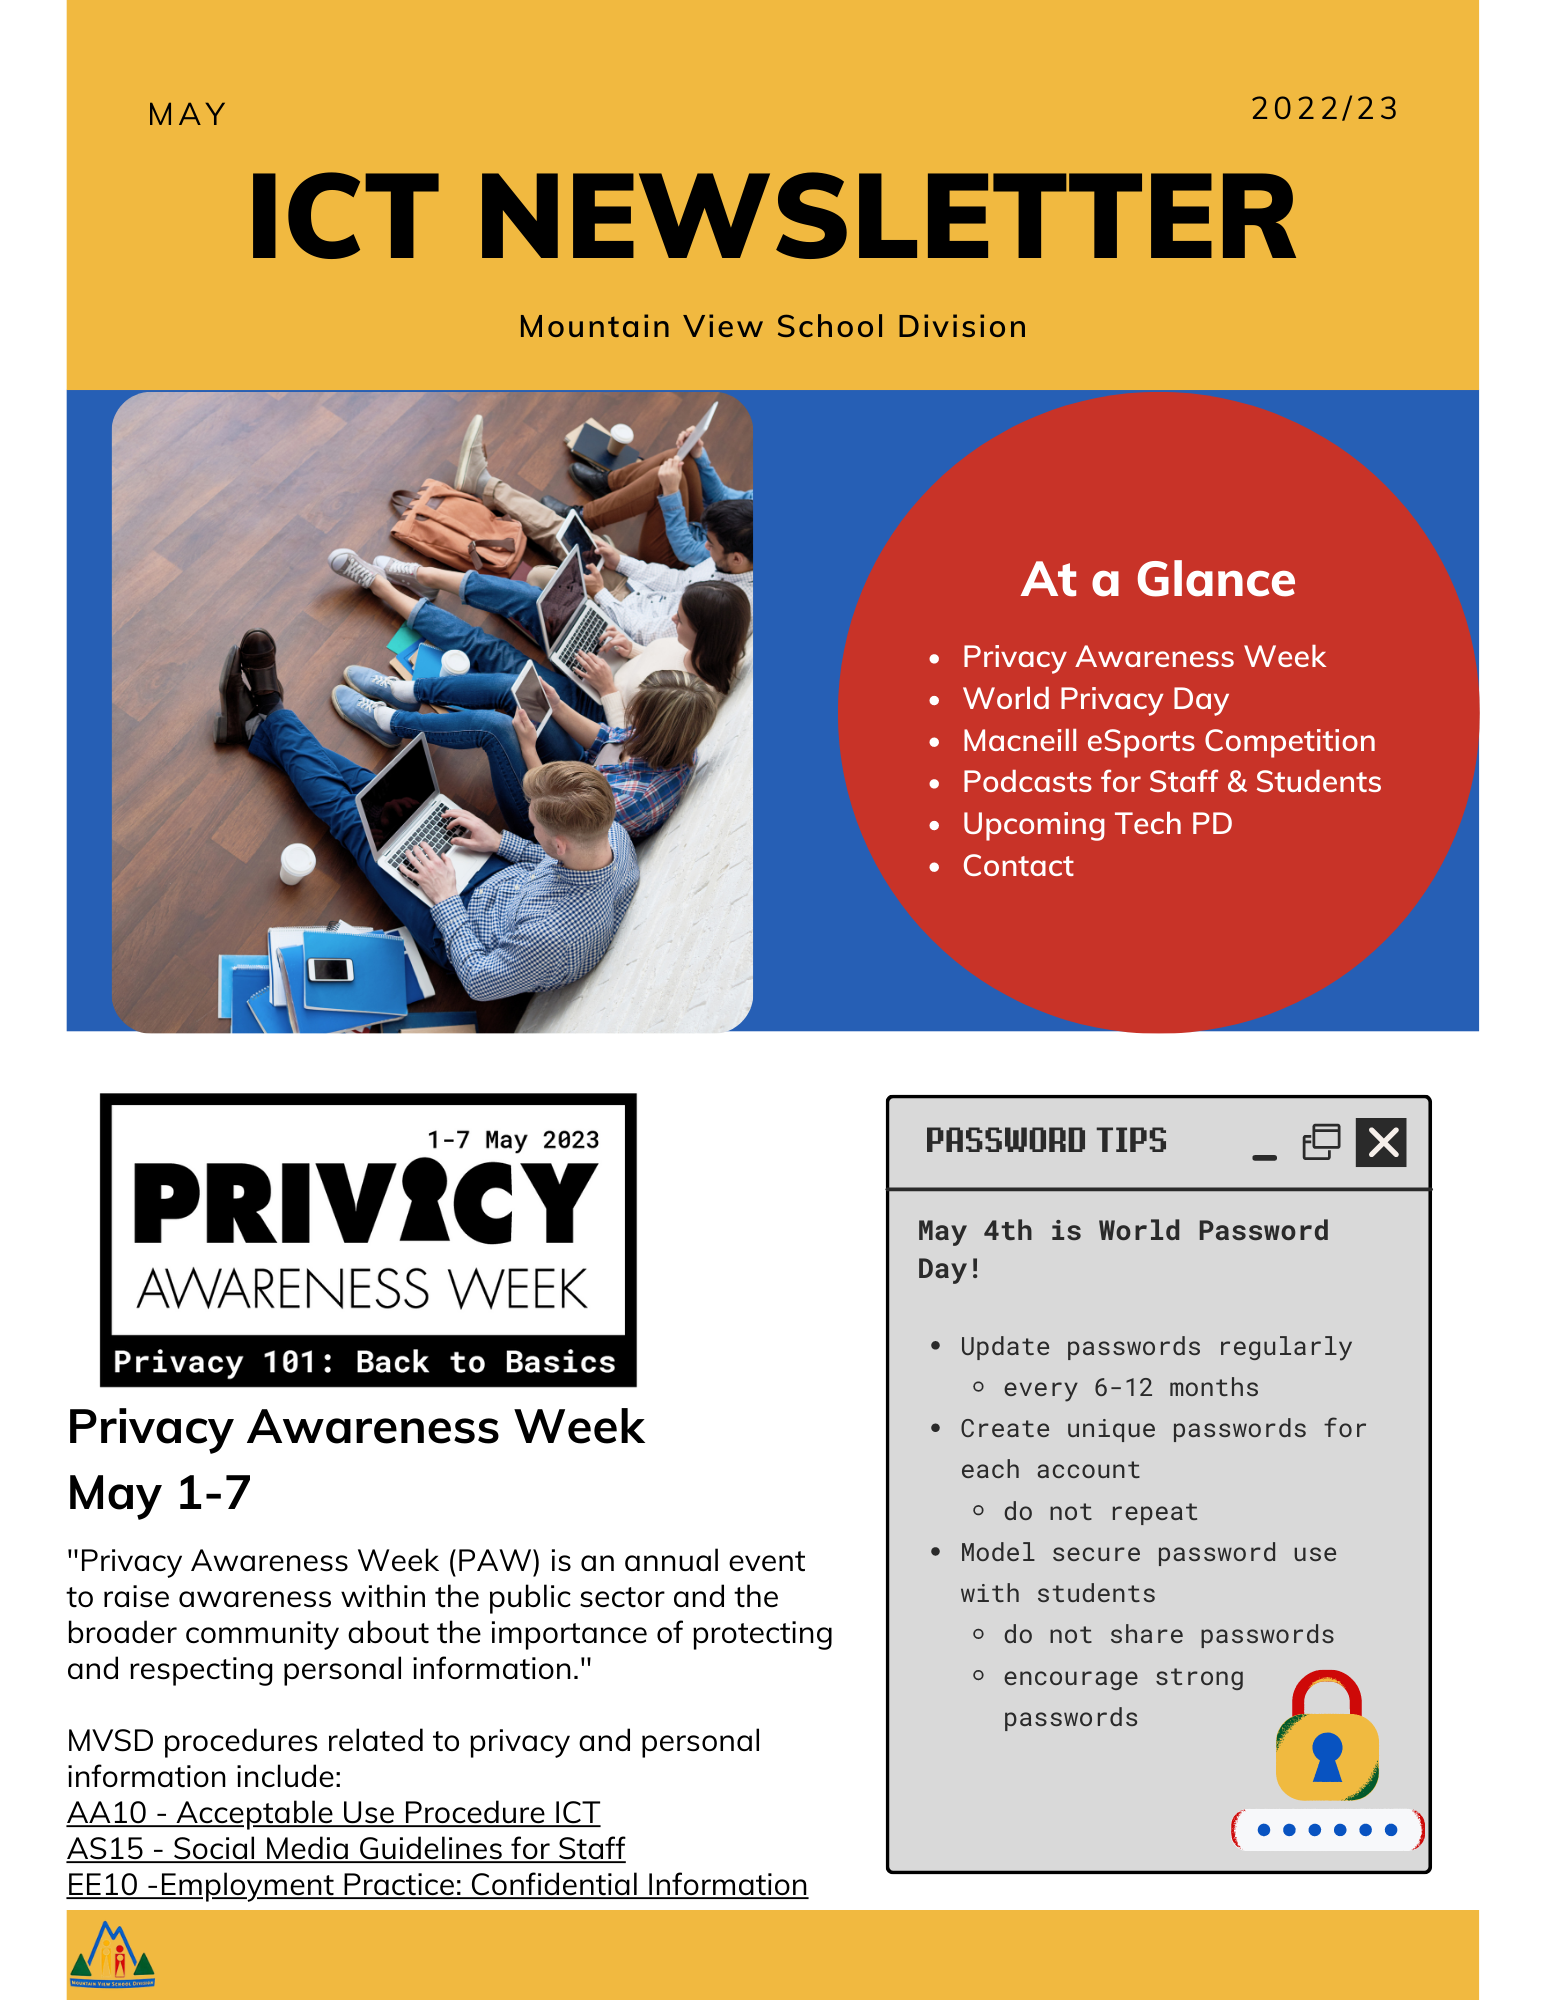 May ICT Newsletter